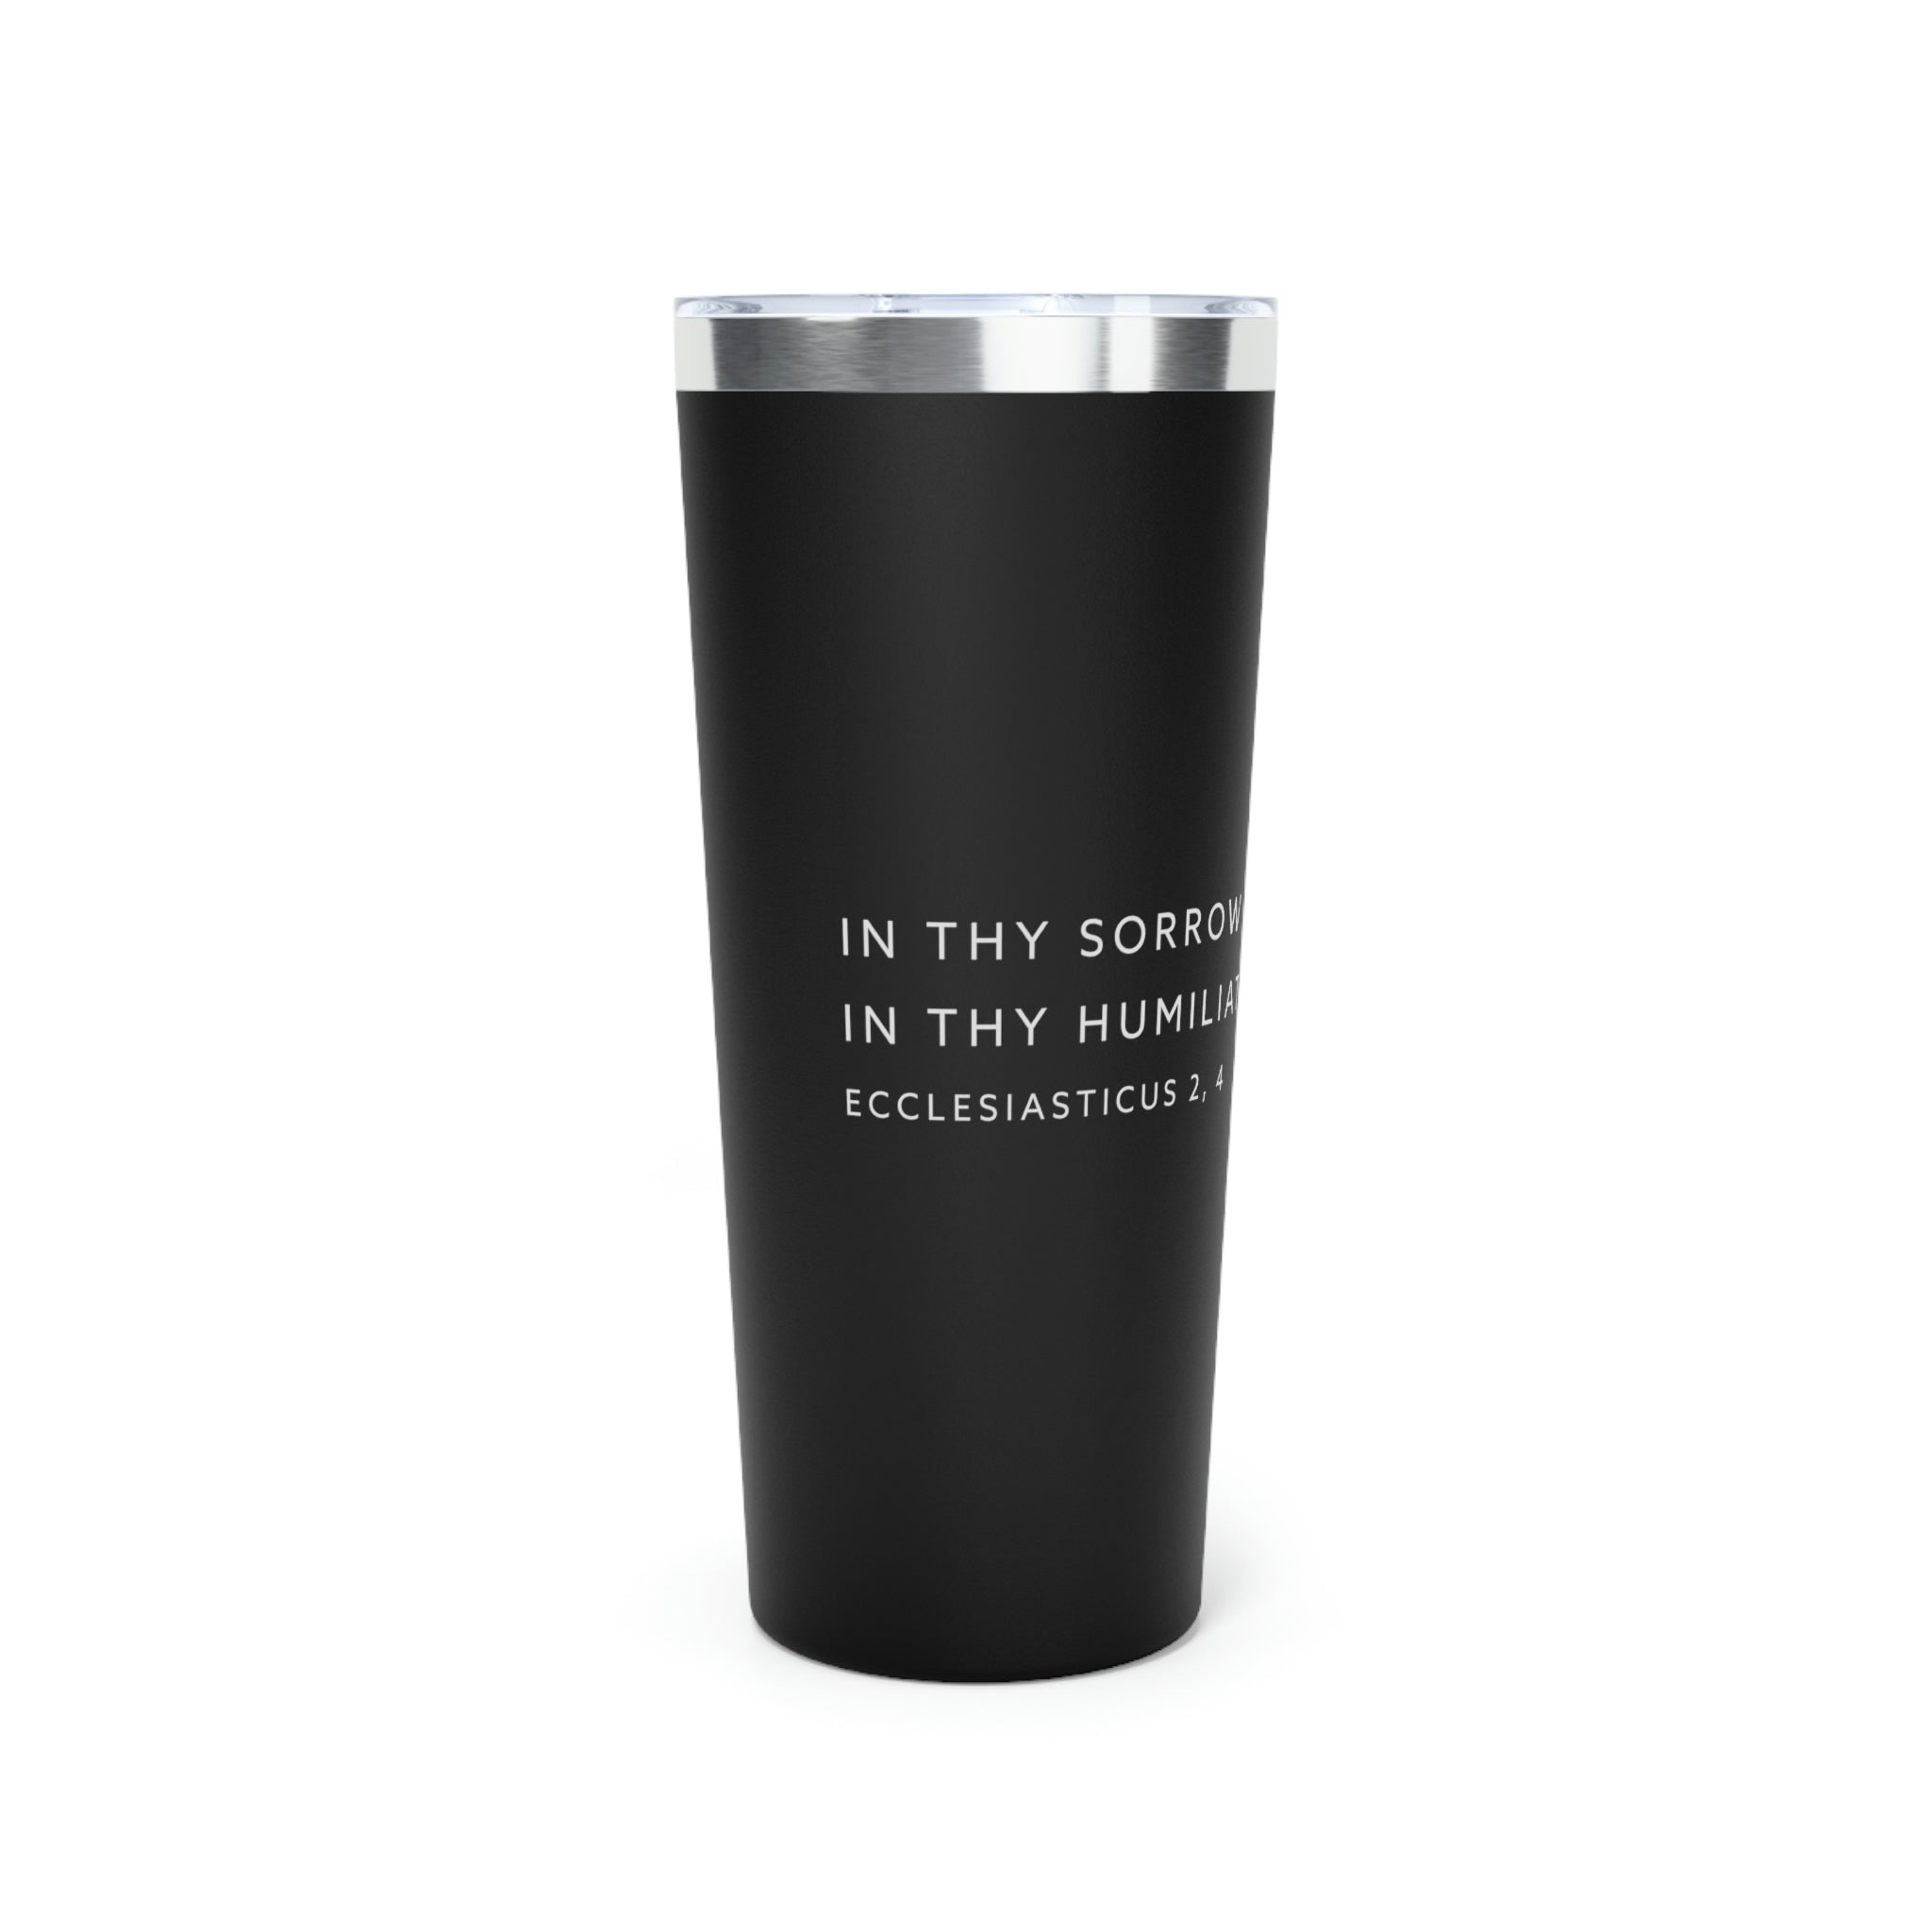 Keep Patience Copper Vacuum Insulated Tumbler